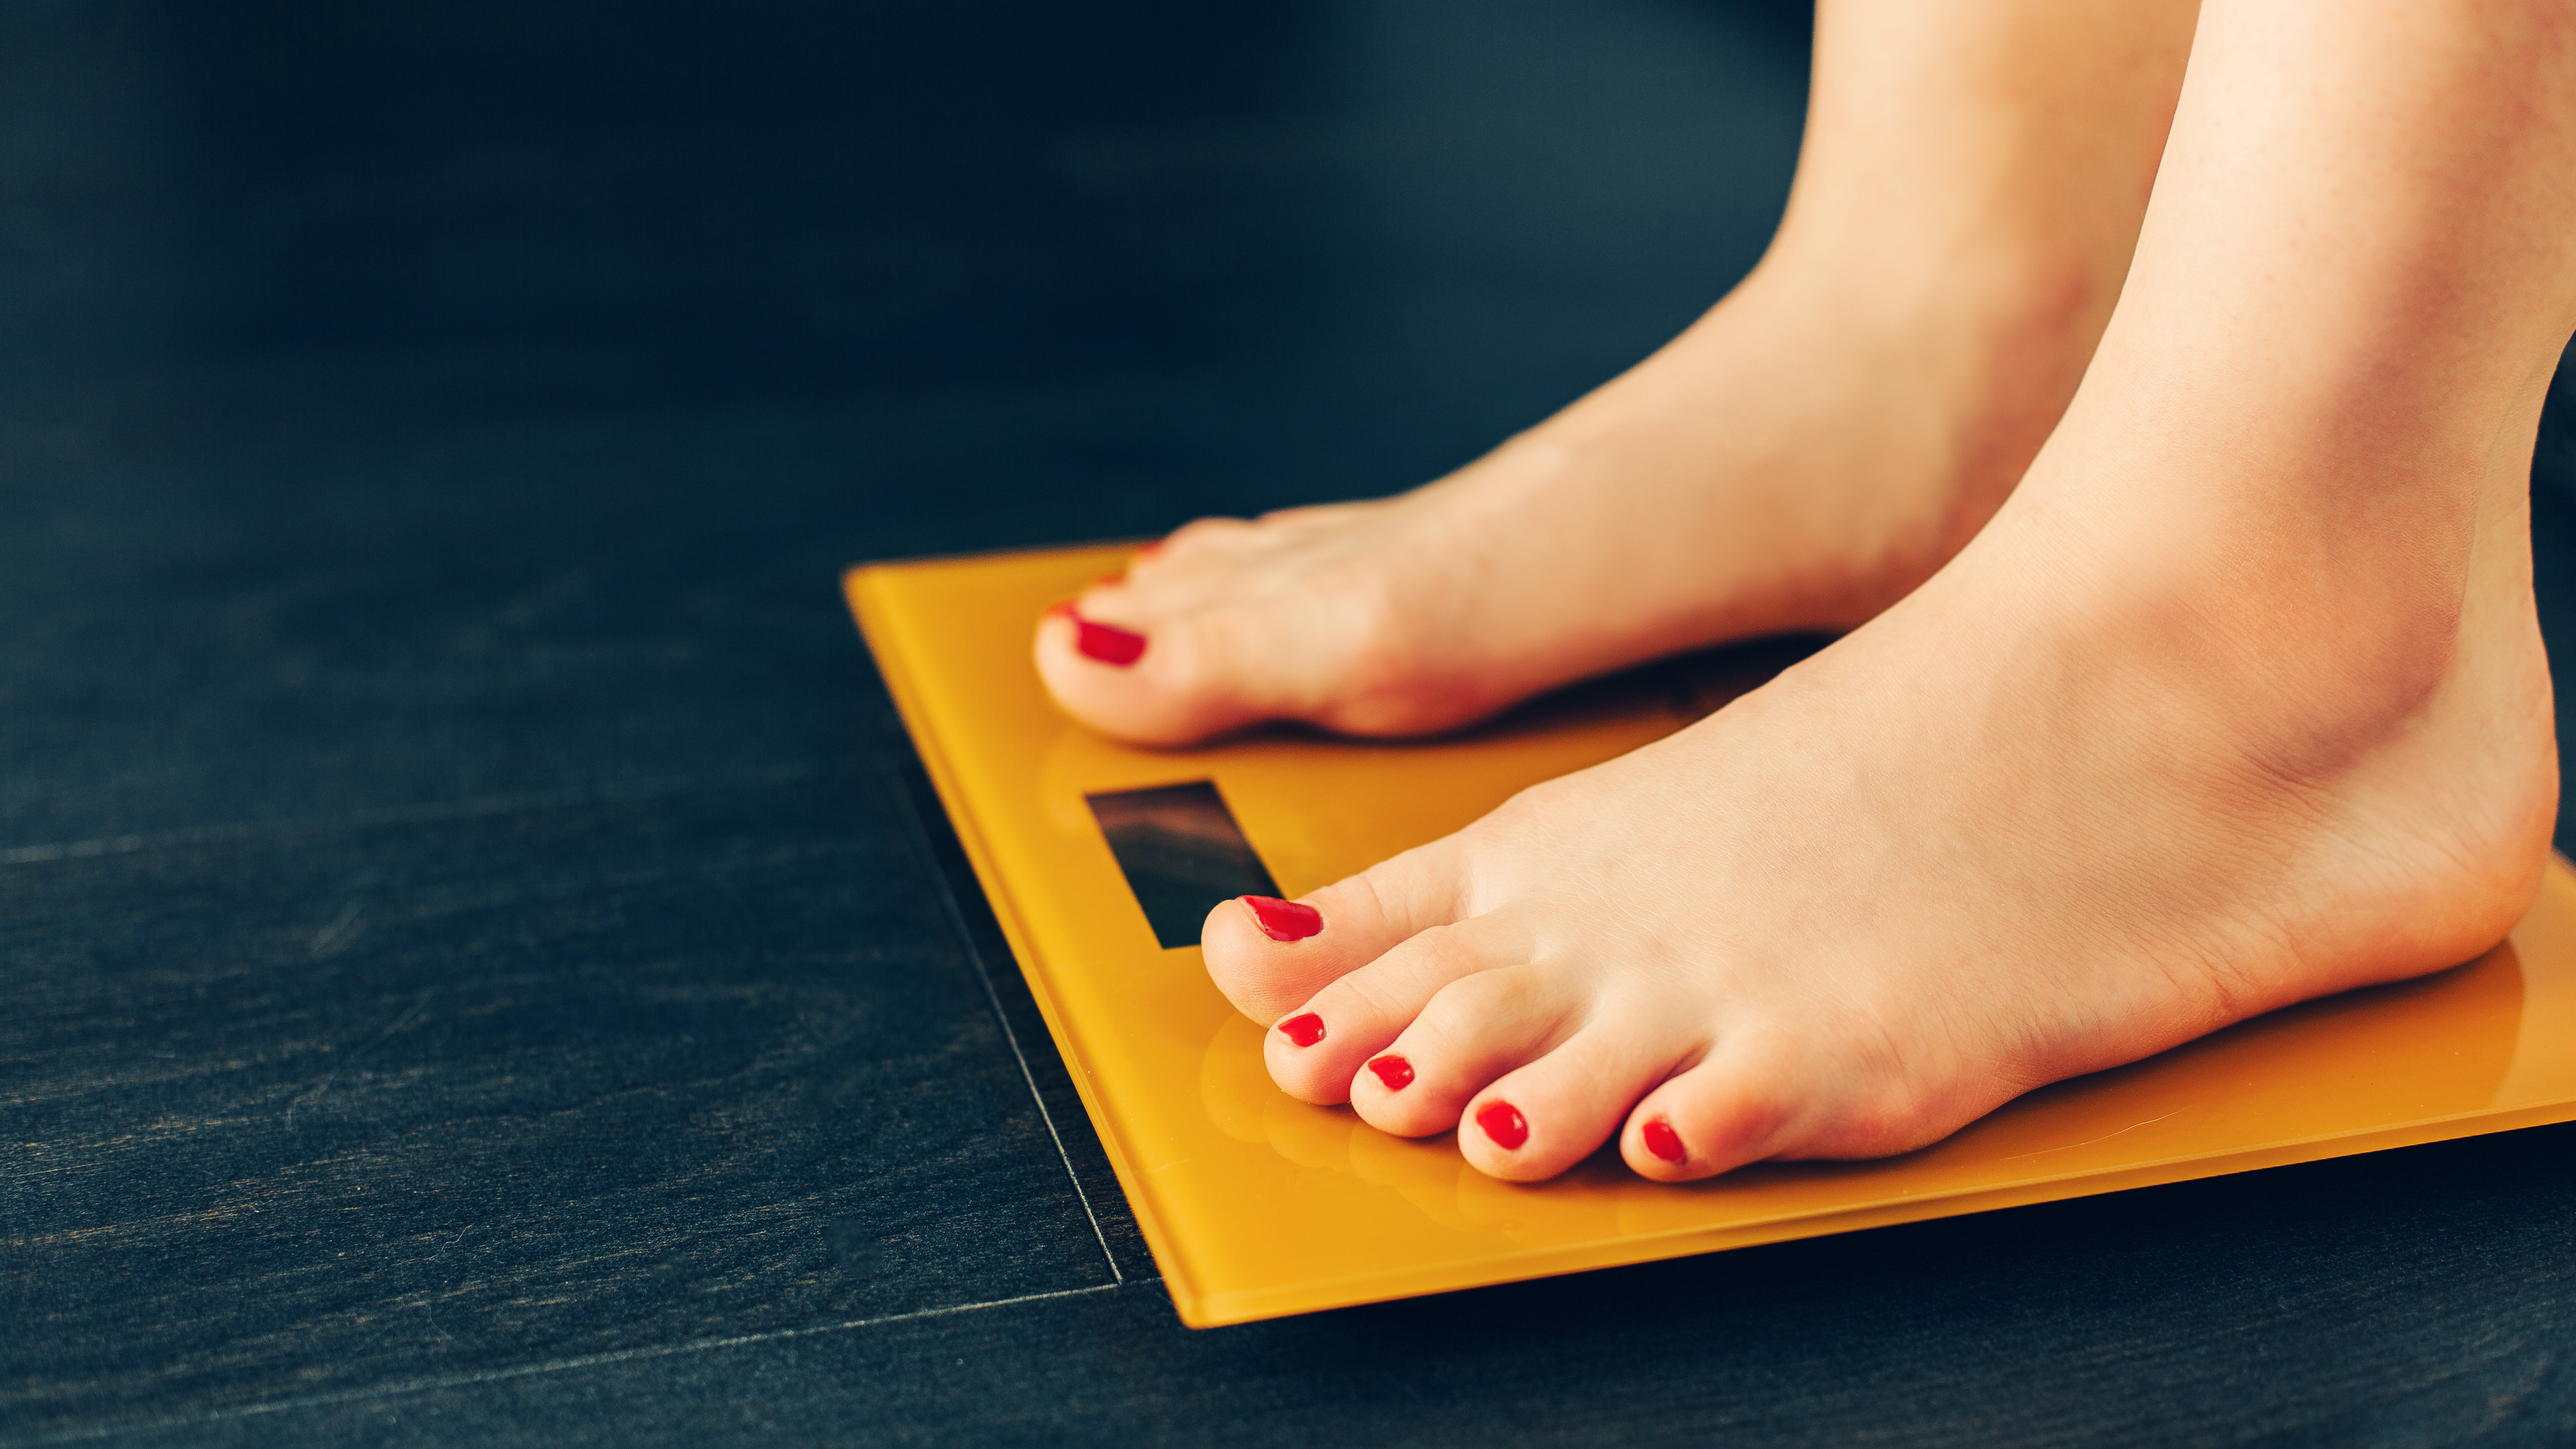 Woman weighing herself on bathroom scale